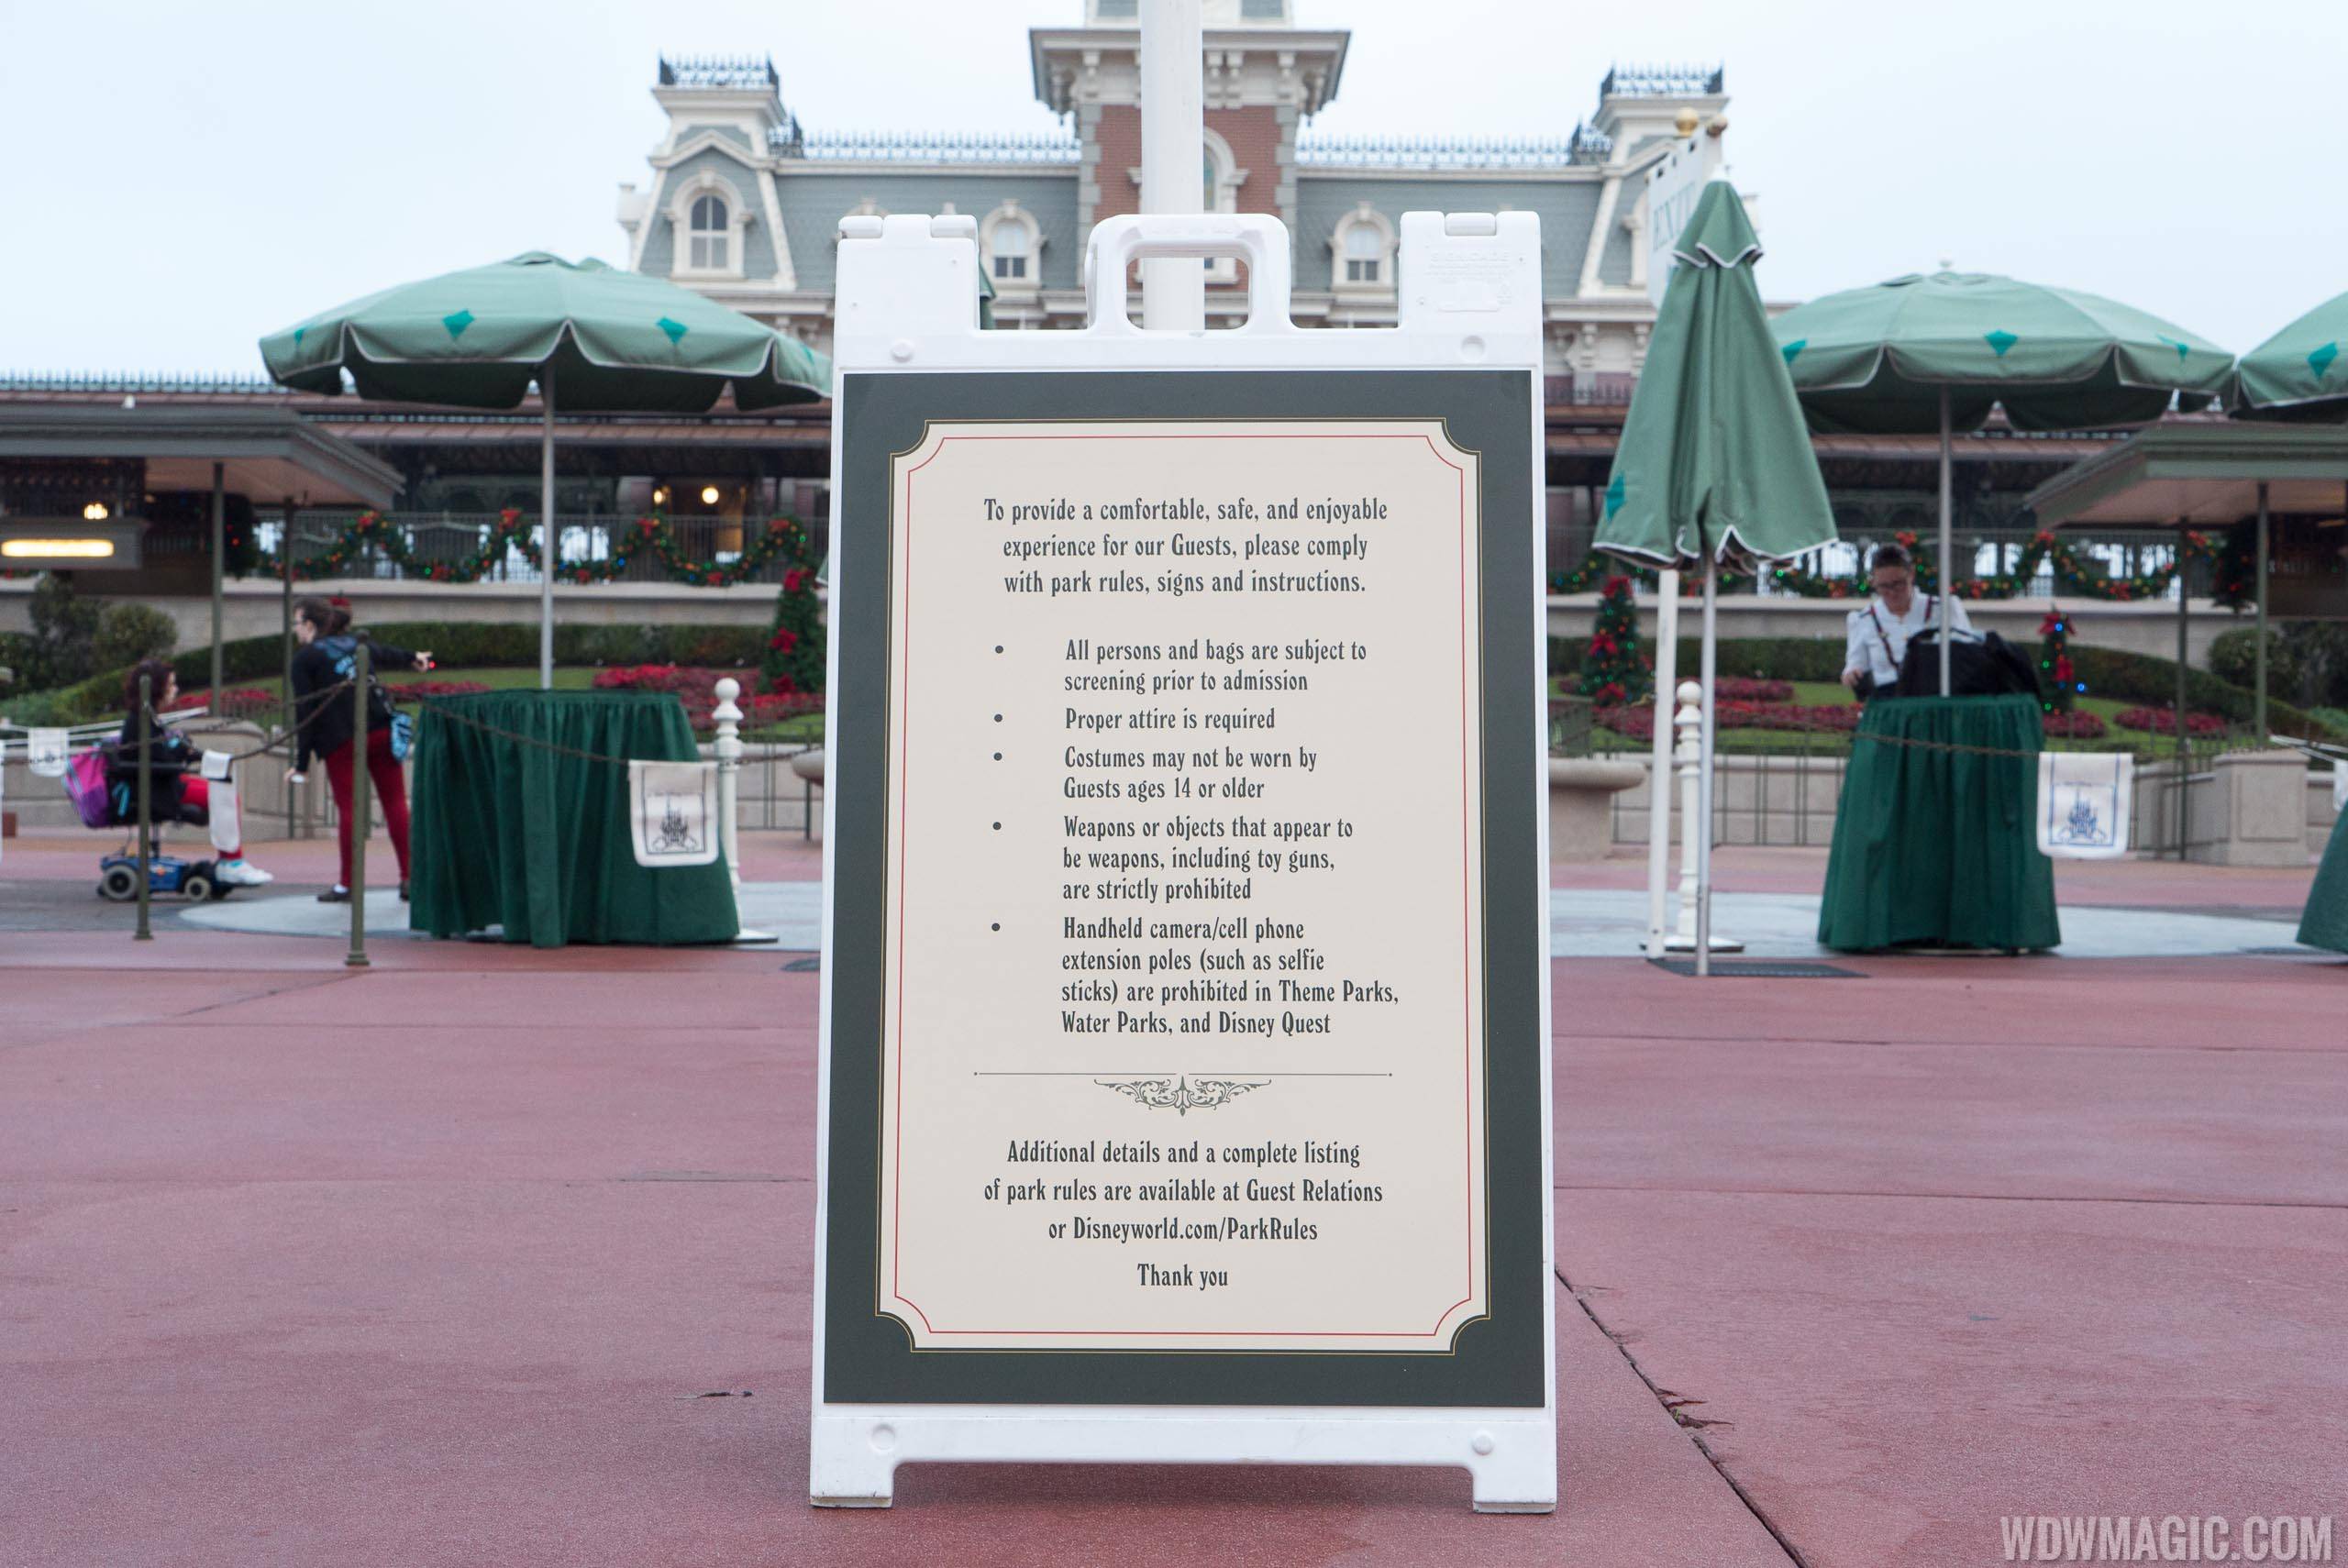 Magic Kingdom metal detectors and new entry policy